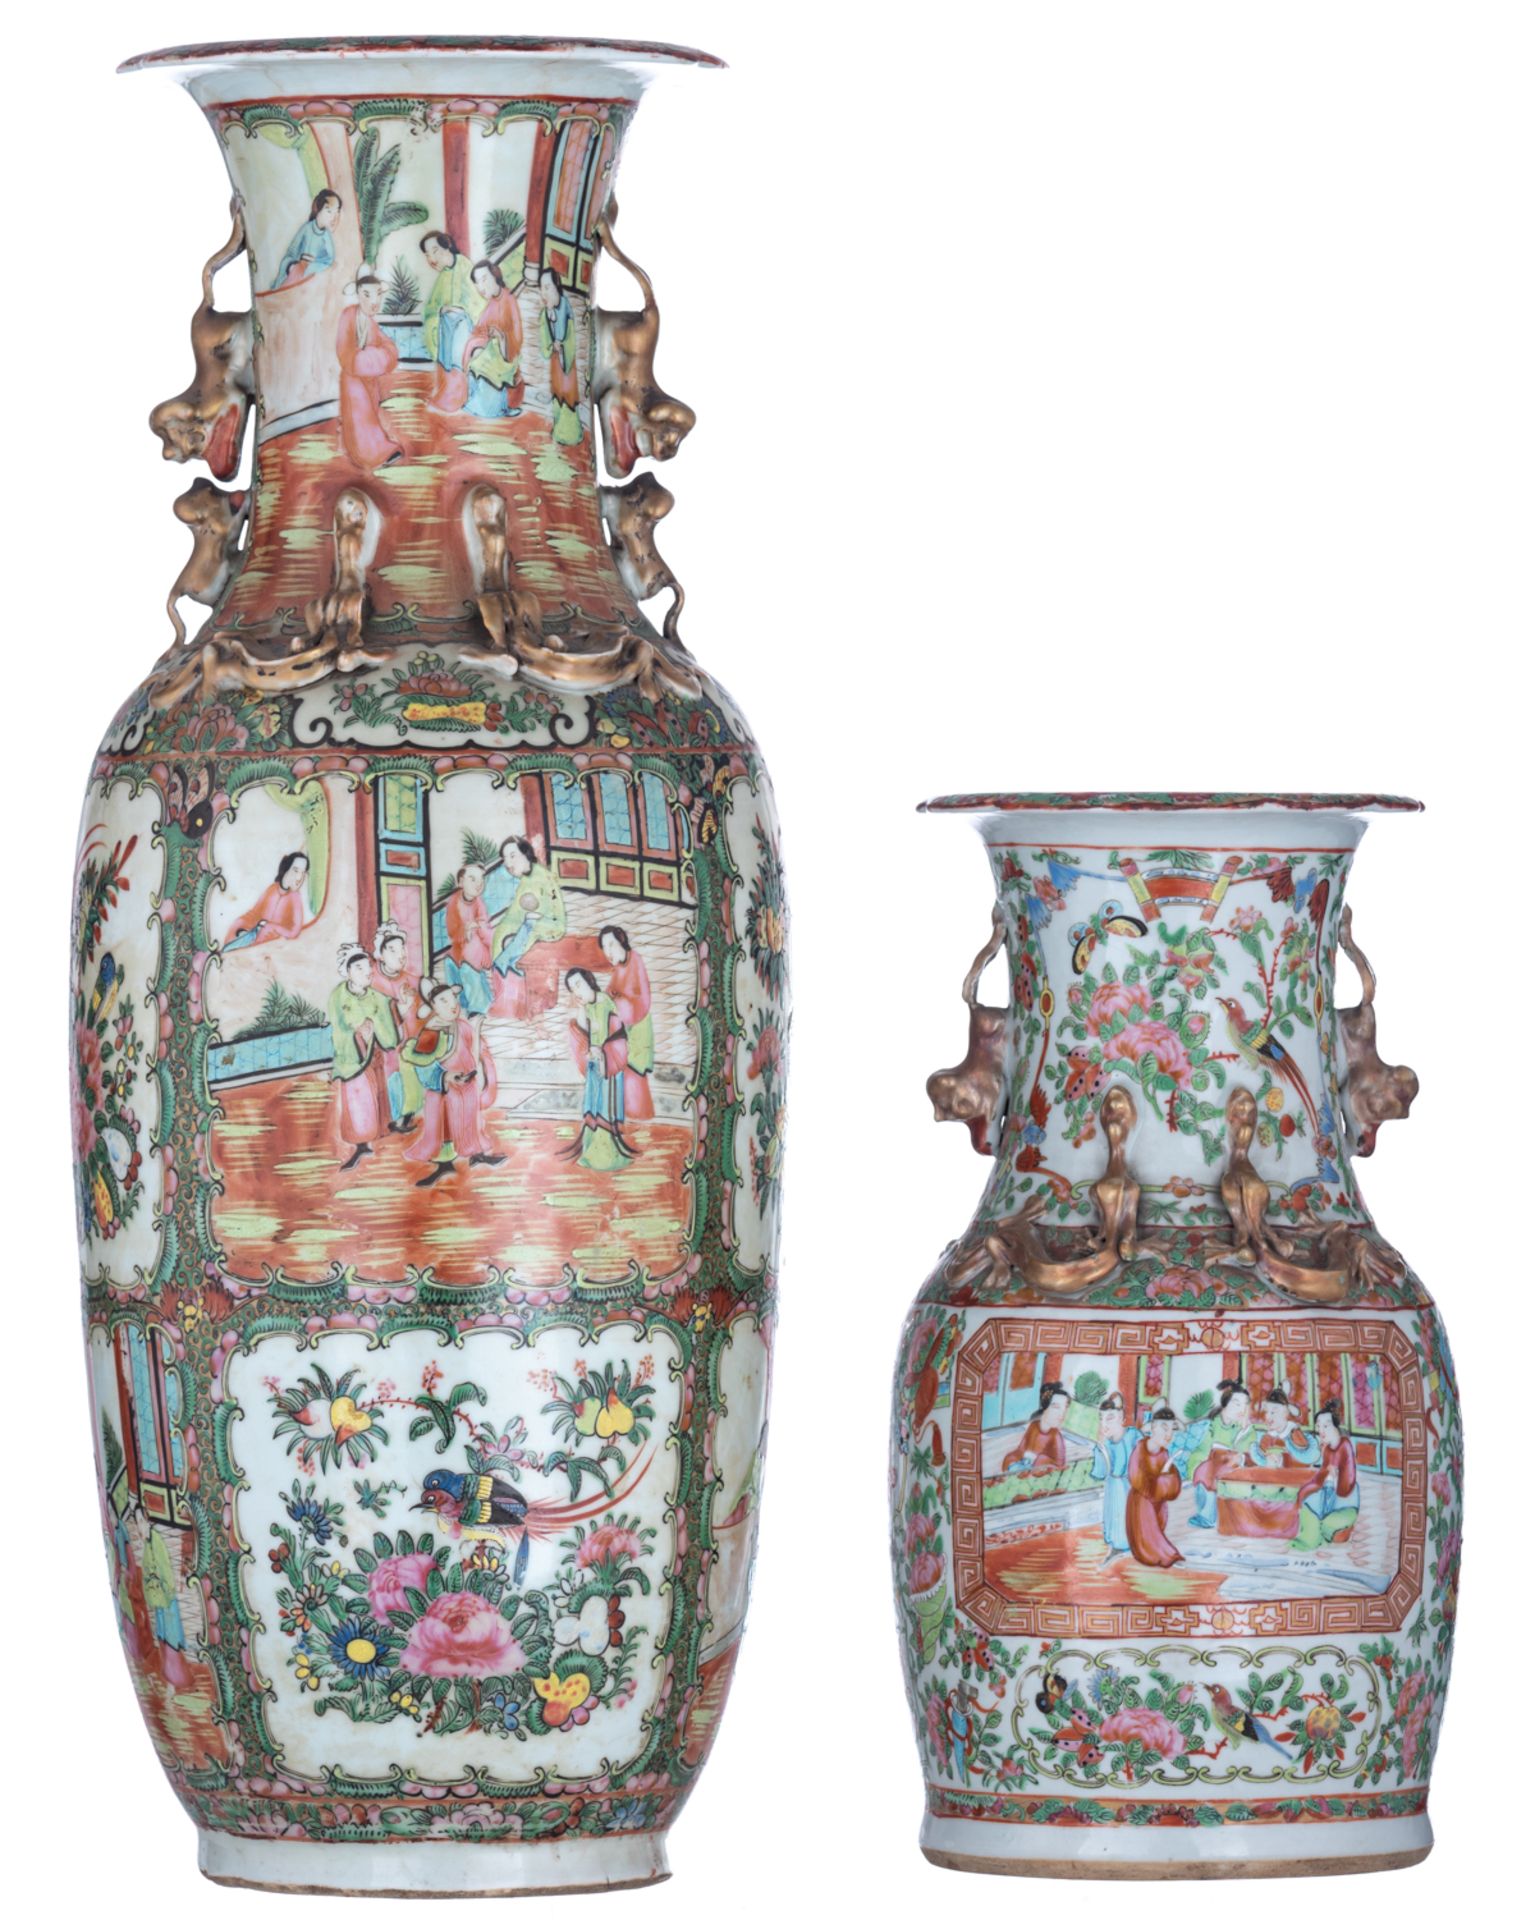 Two Chinese Canton polychrome vases, decorated with figures, birds and flowers, H 35,5 - 60 cm - Image 4 of 7